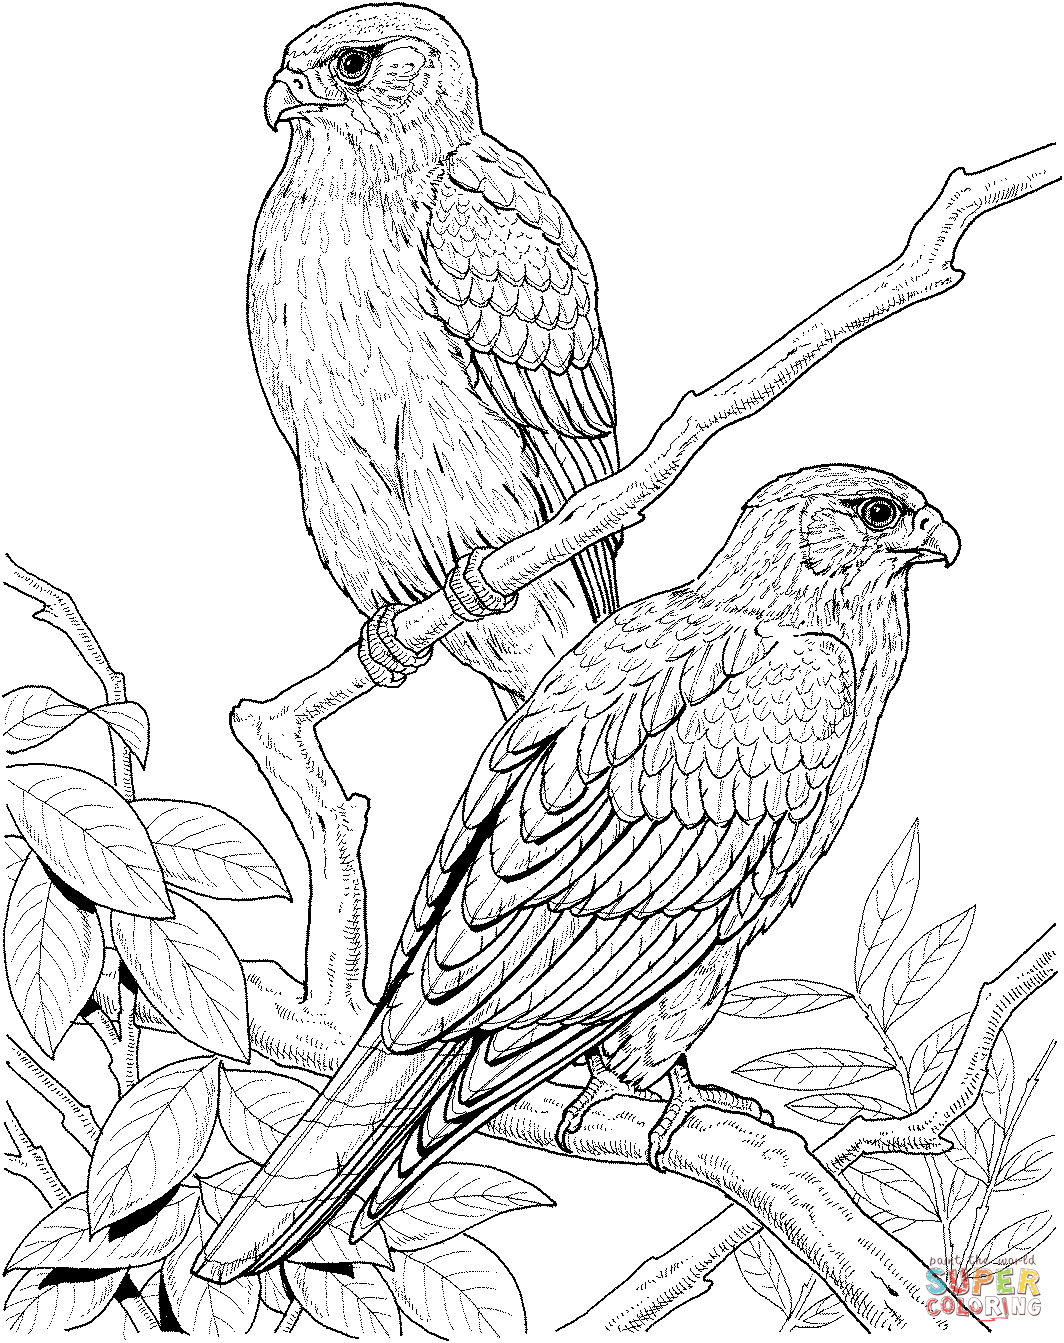 Gyrfalcon coloring #9, Download drawings